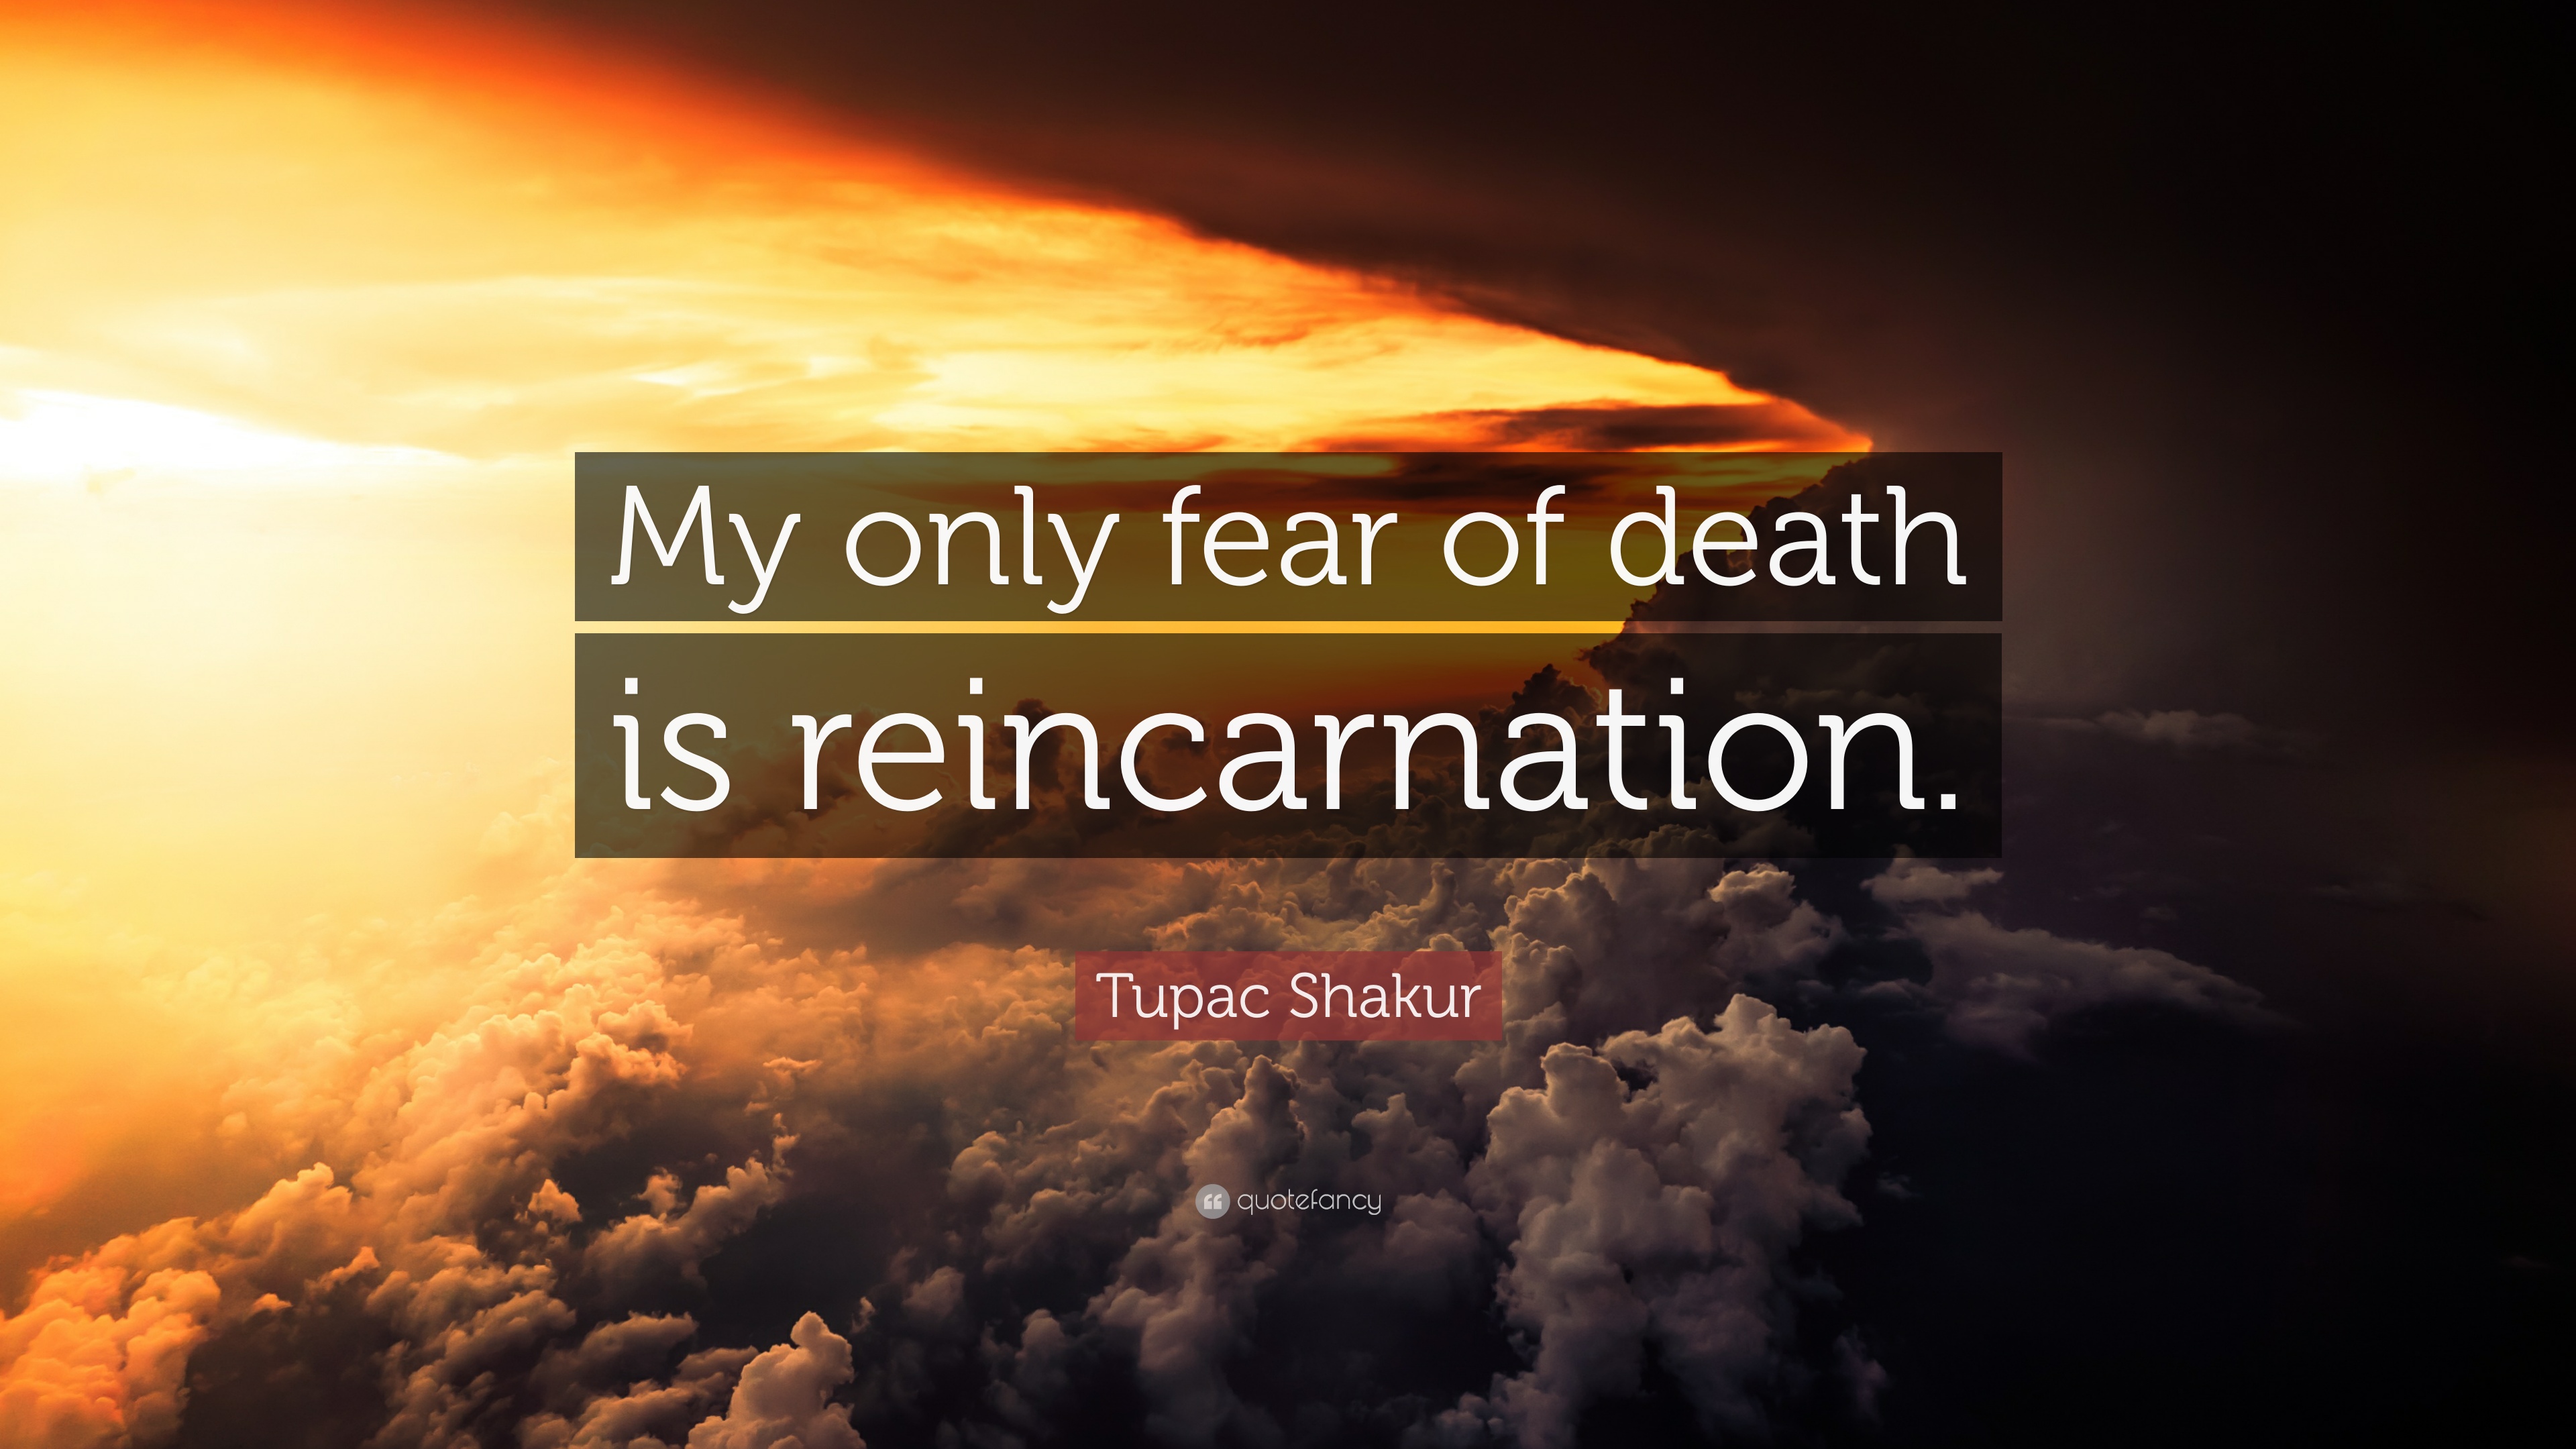 Tupac Shakur Quote: “My only fear of death is reincarnation